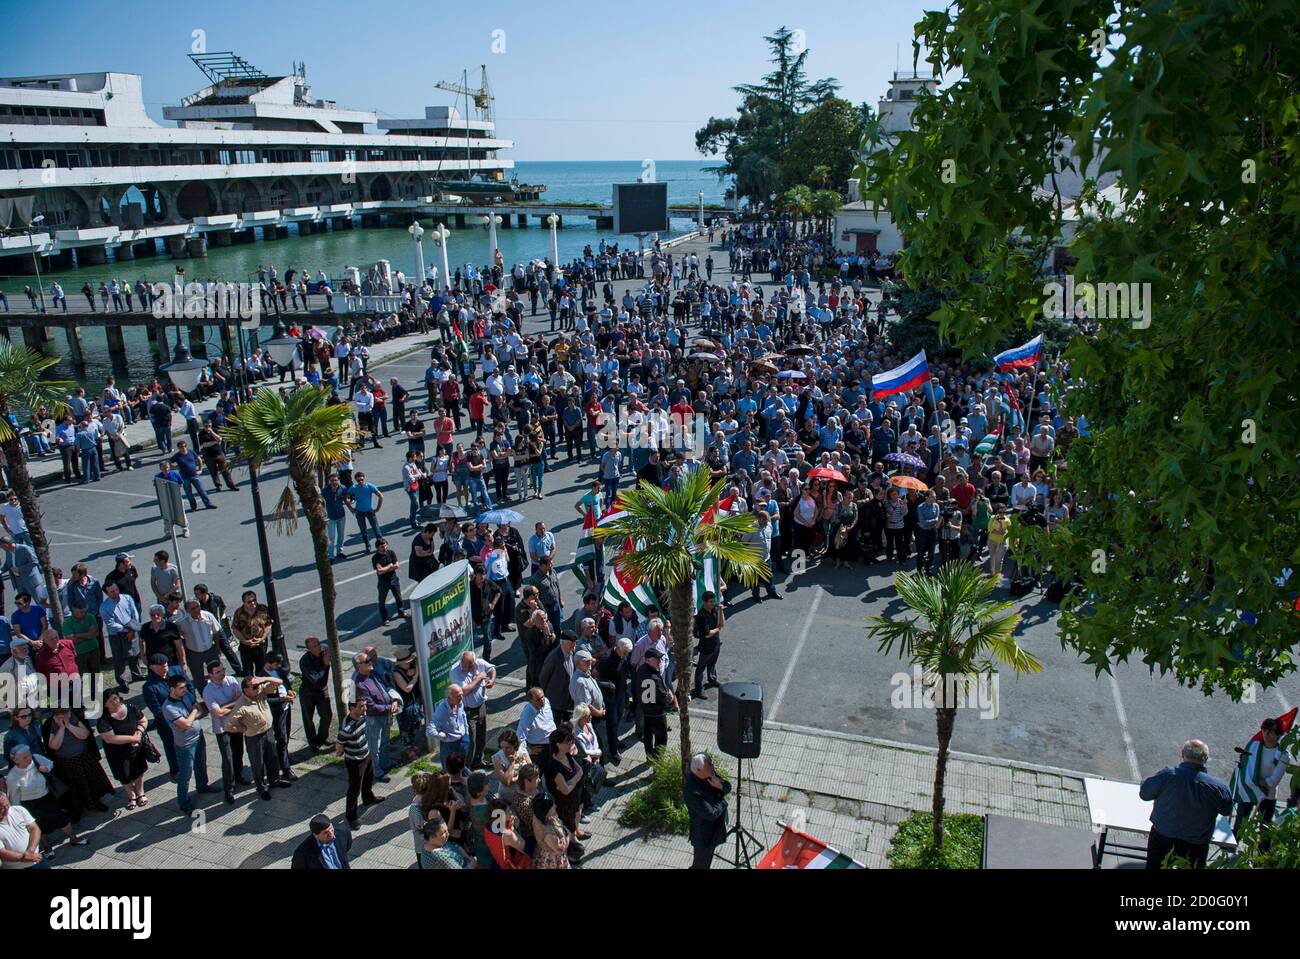 Supporters of Abkhazia's President Alexander Ankvab hold a rally in Sukhumi, the capital of Georgia's breakaway region of Abkhazia May 28, 2014. Russia expressed concern on Wednesday over unrest in Abkhazia, where demonstrators have seized control of the presidential administration headquarters in what the leader of the Moscow-backed breakaway province of Georgia called an attempted coup. REUTERS/Nina Zotina (GEORGIA - Tags: POLITICS CIVIL UNREST) Stock Photo